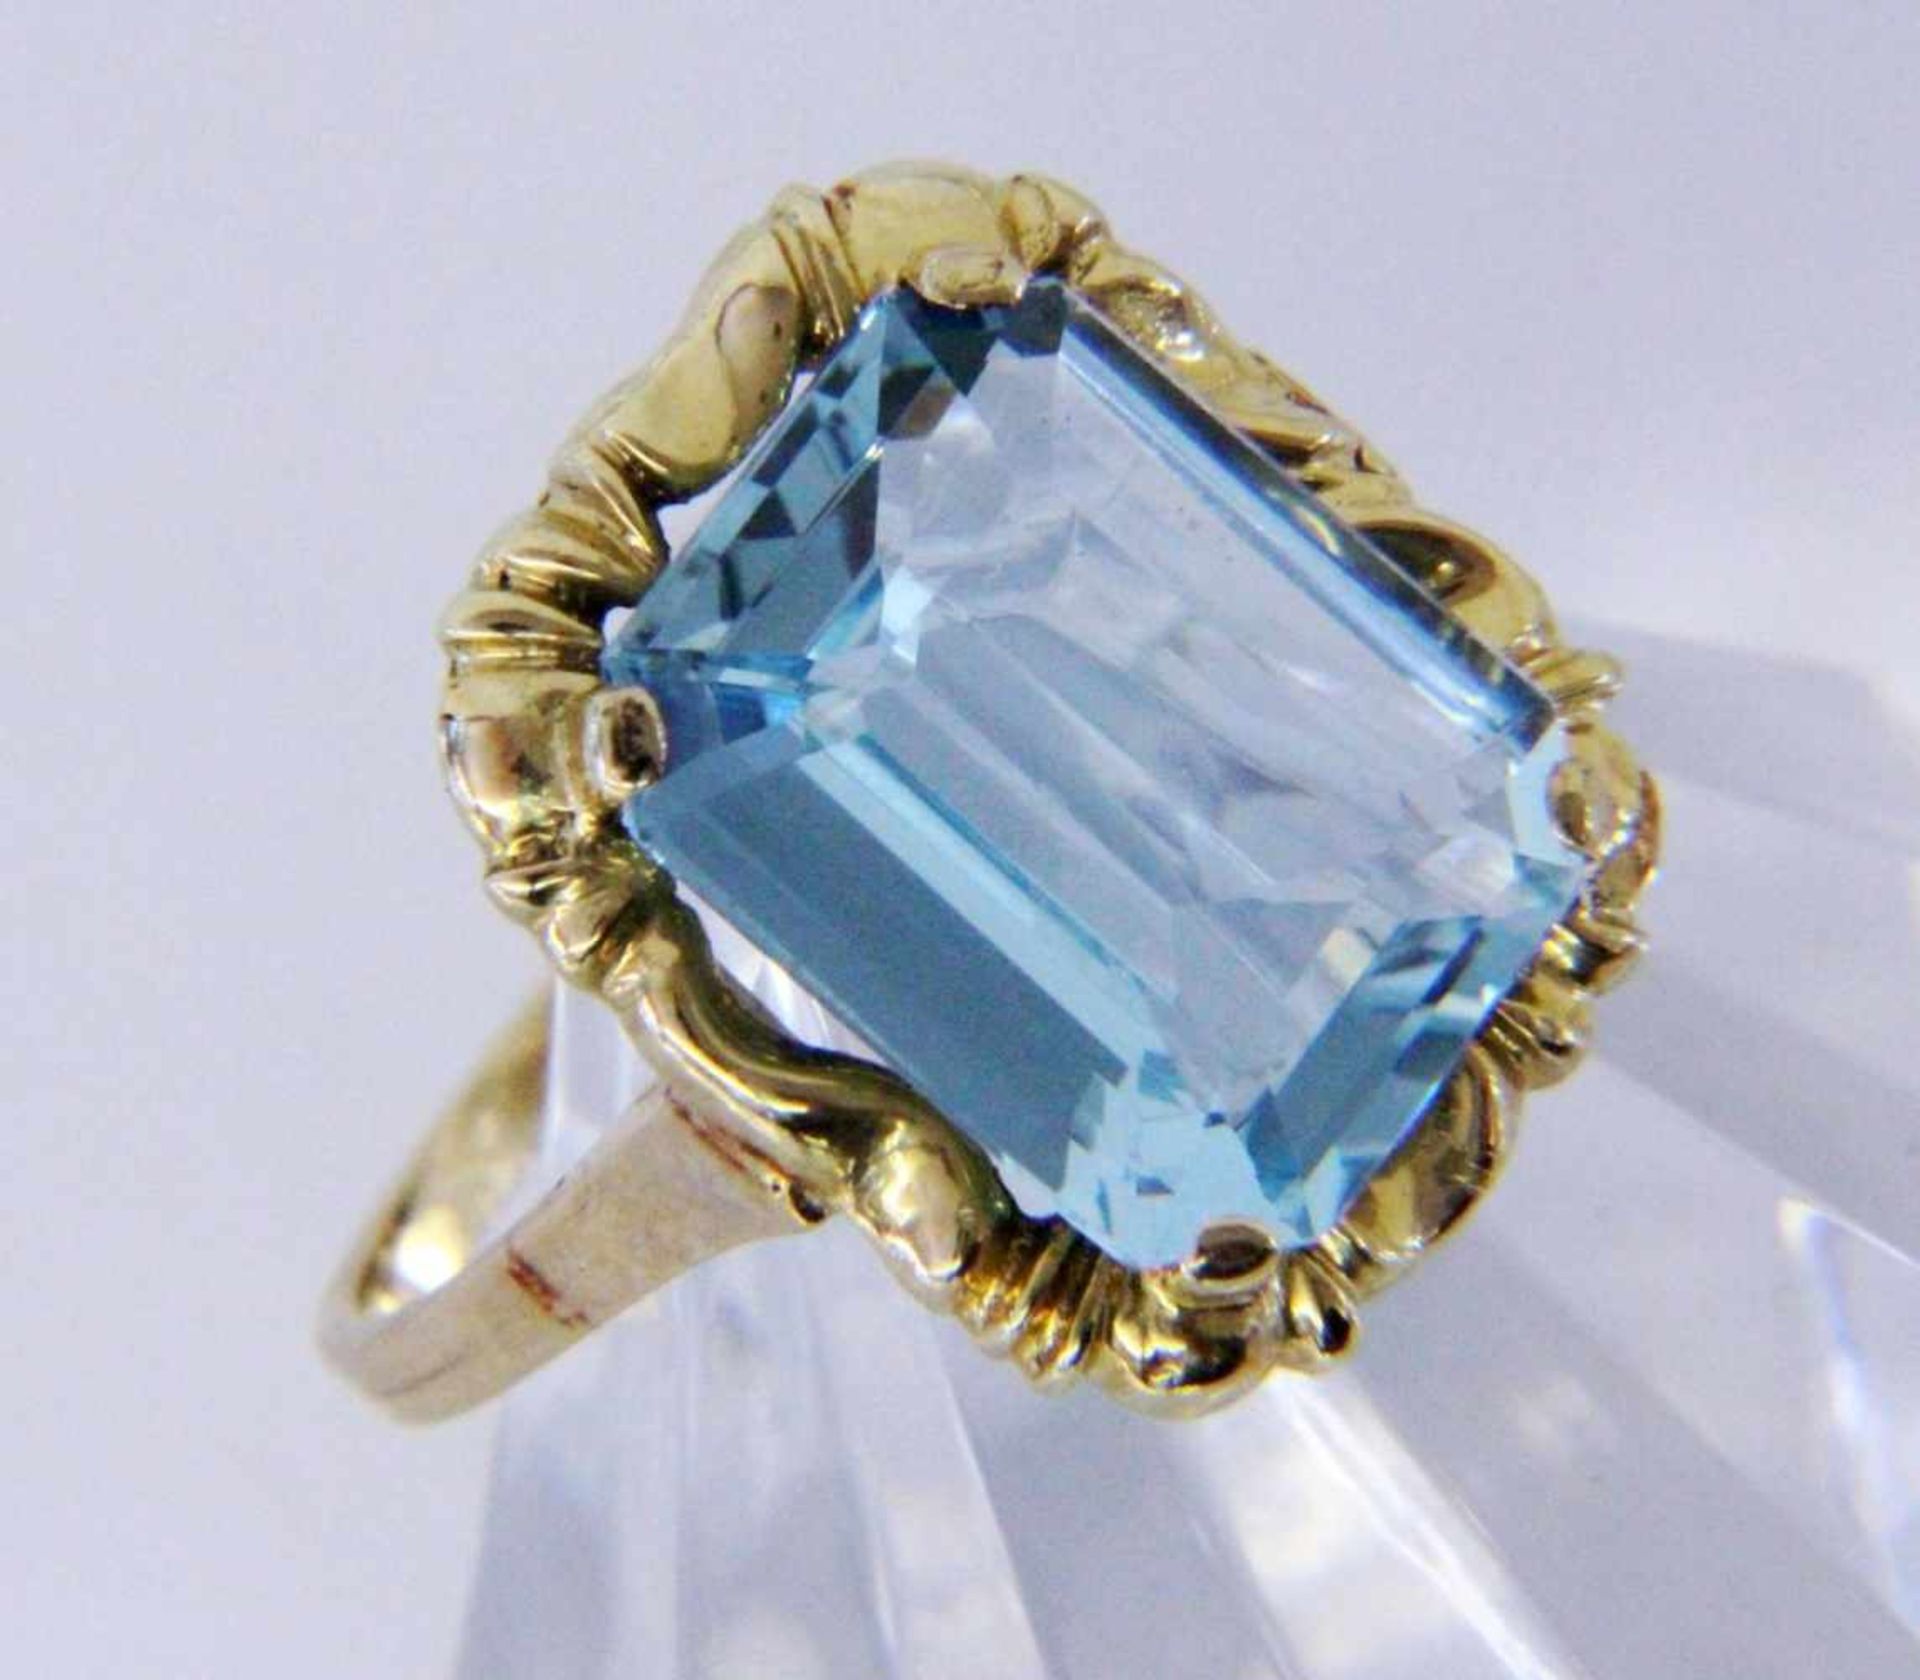 A LADIES RING 585/000 yellow gold with fine aquamarine of approximately 7.5ct. Ring size